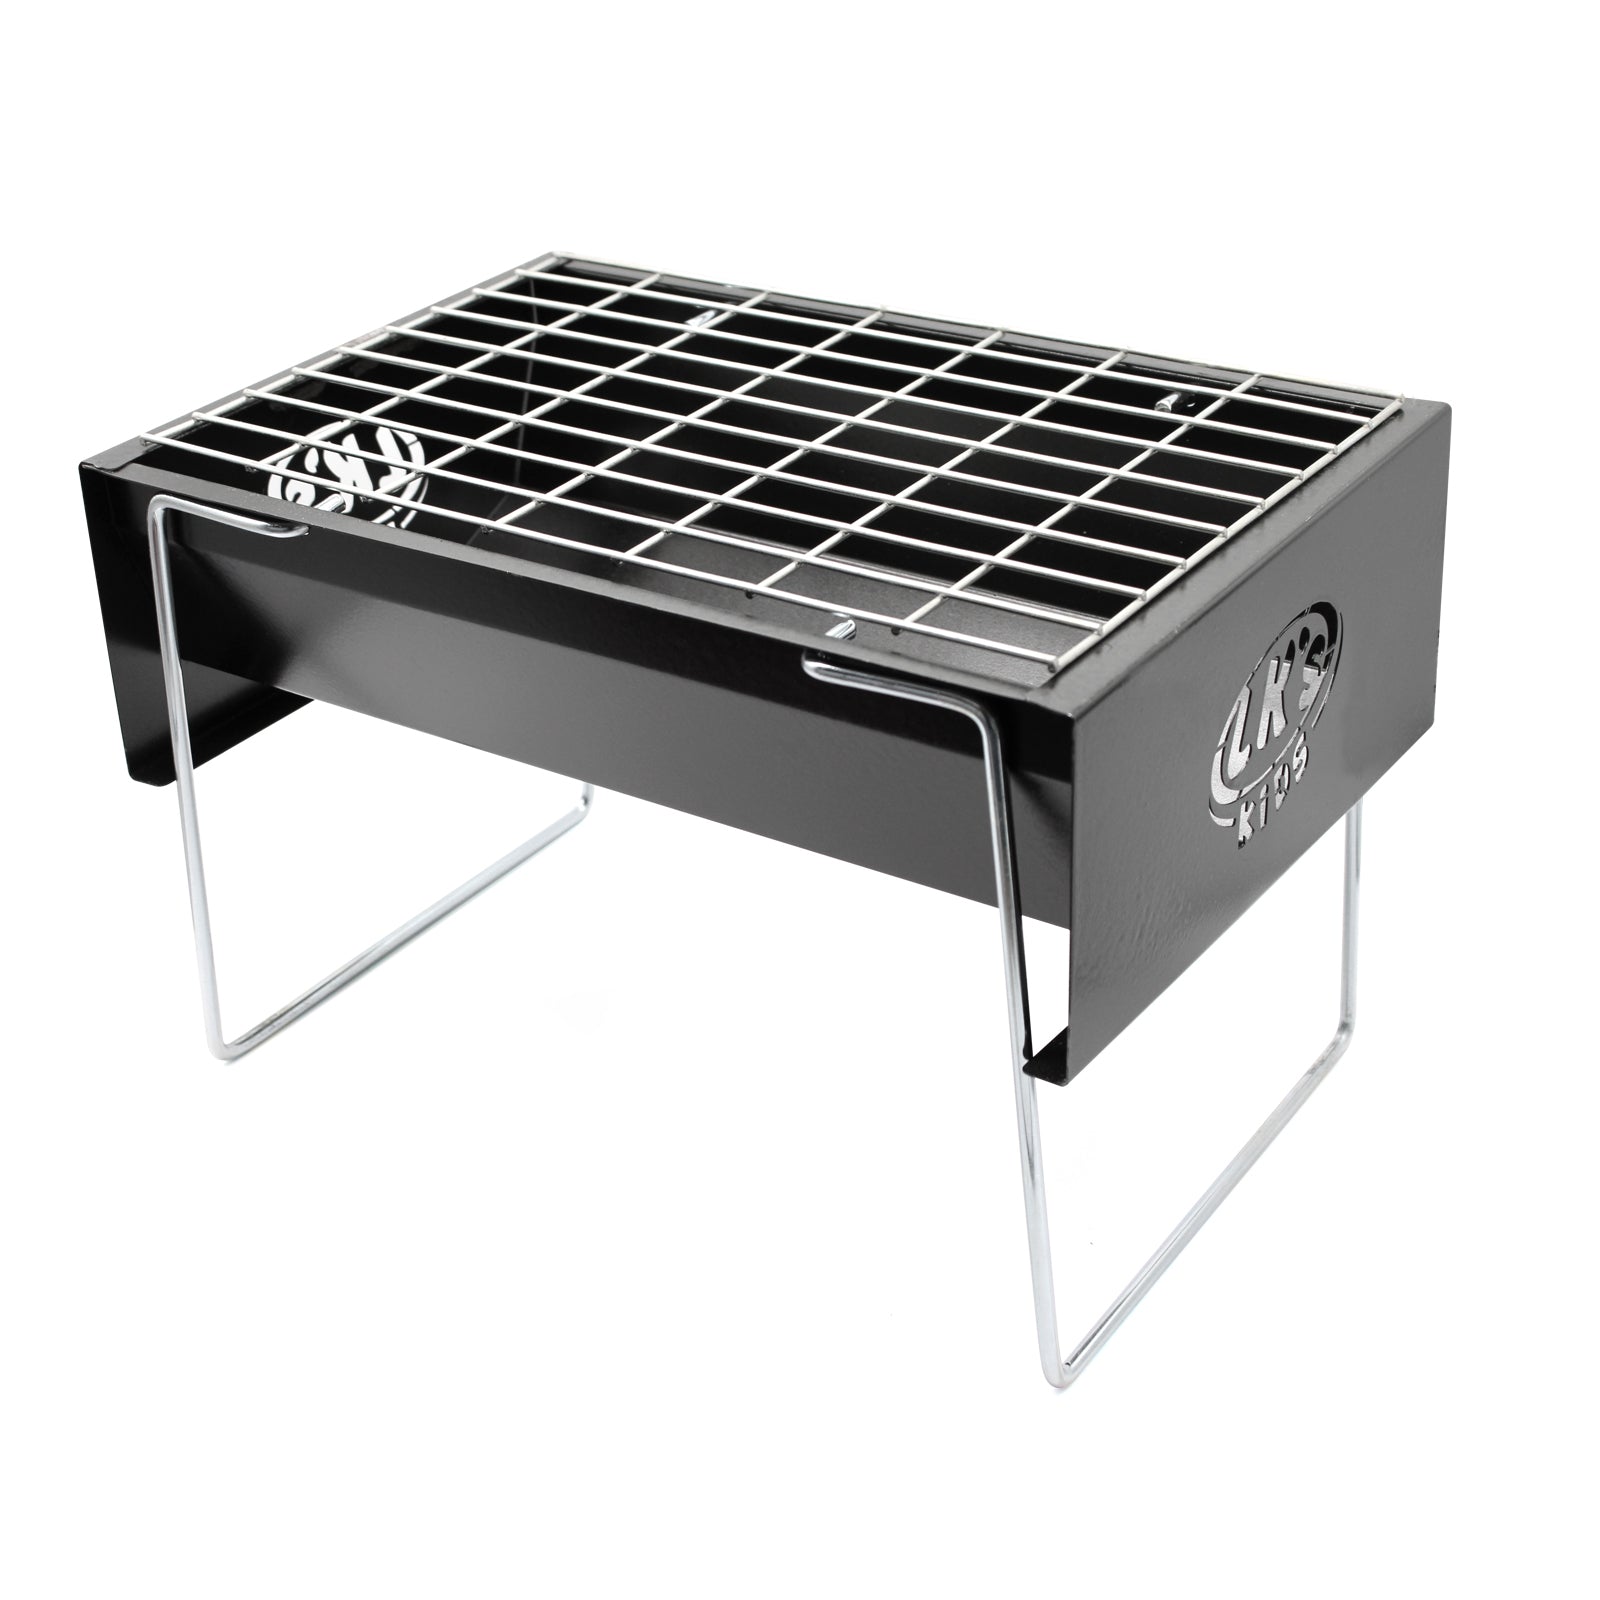 Mini Barbecue for Kids Outdoor Cooking Grill